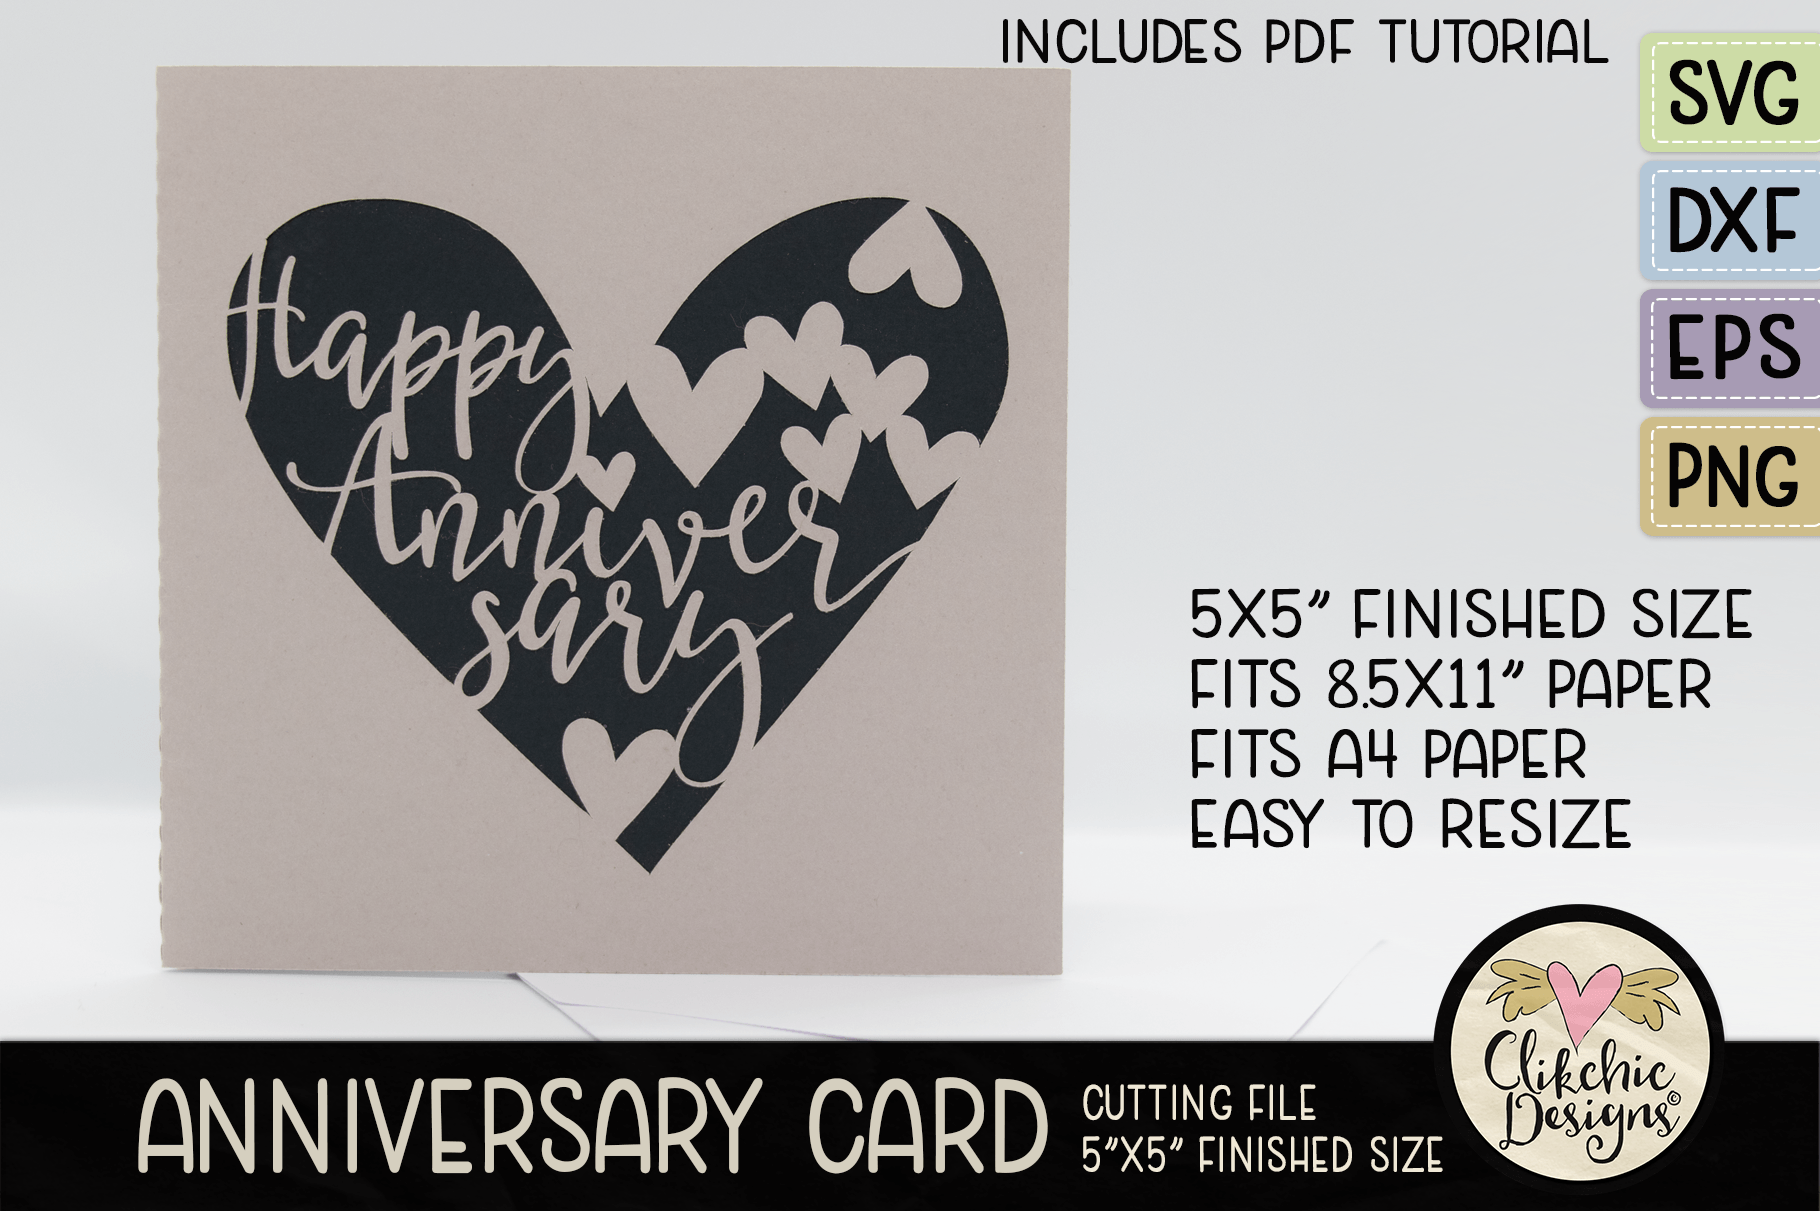 Download Anniversary Card Svg Happy Anniversary Svg Cutting File By Clikchic Designs Thehungryjpeg Com